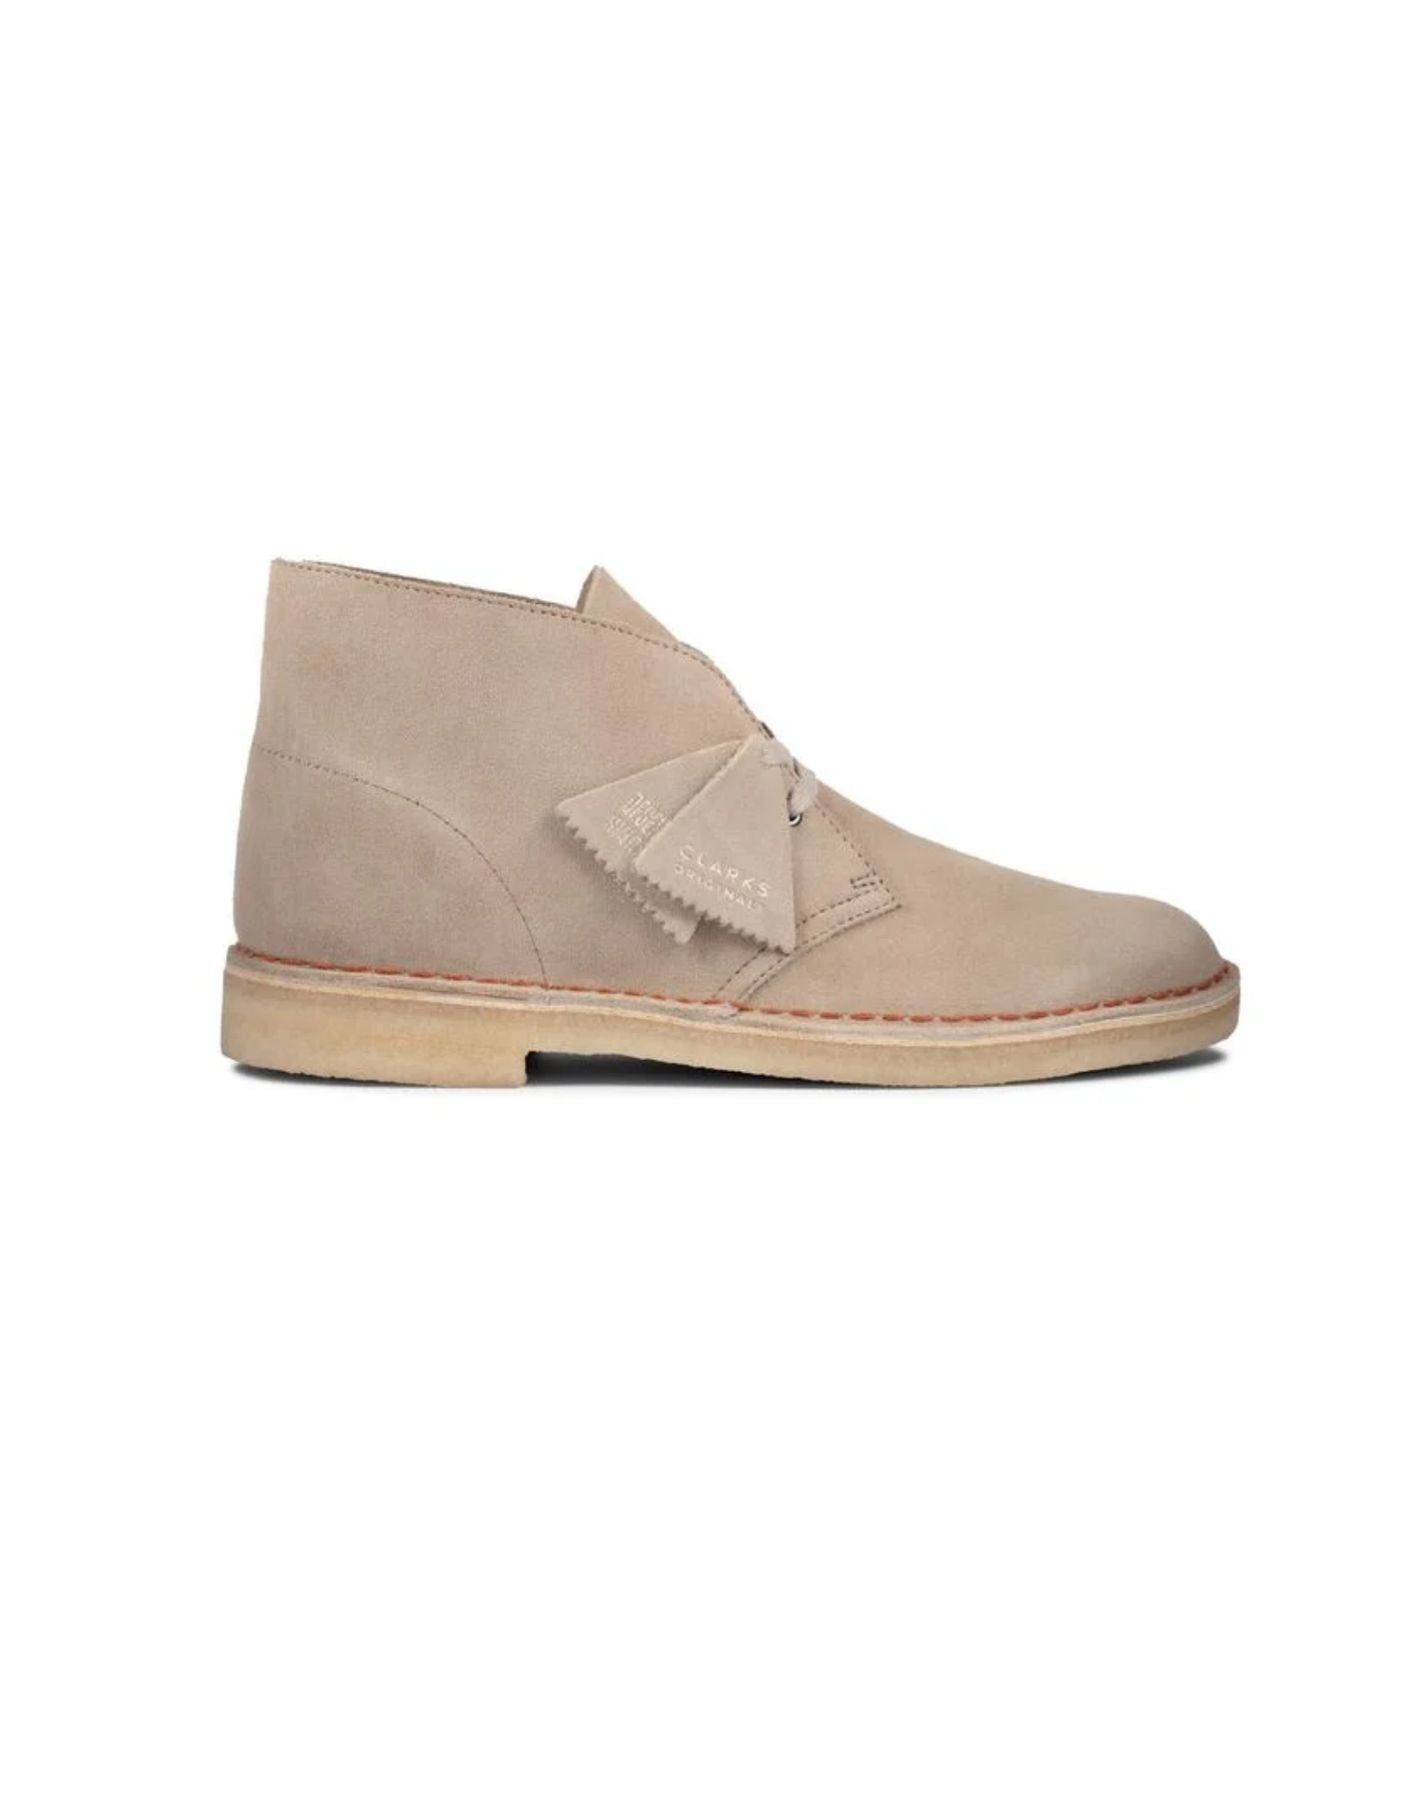 Shoes for woman DESERT BOOT SAND SUEDE Clarks Originals